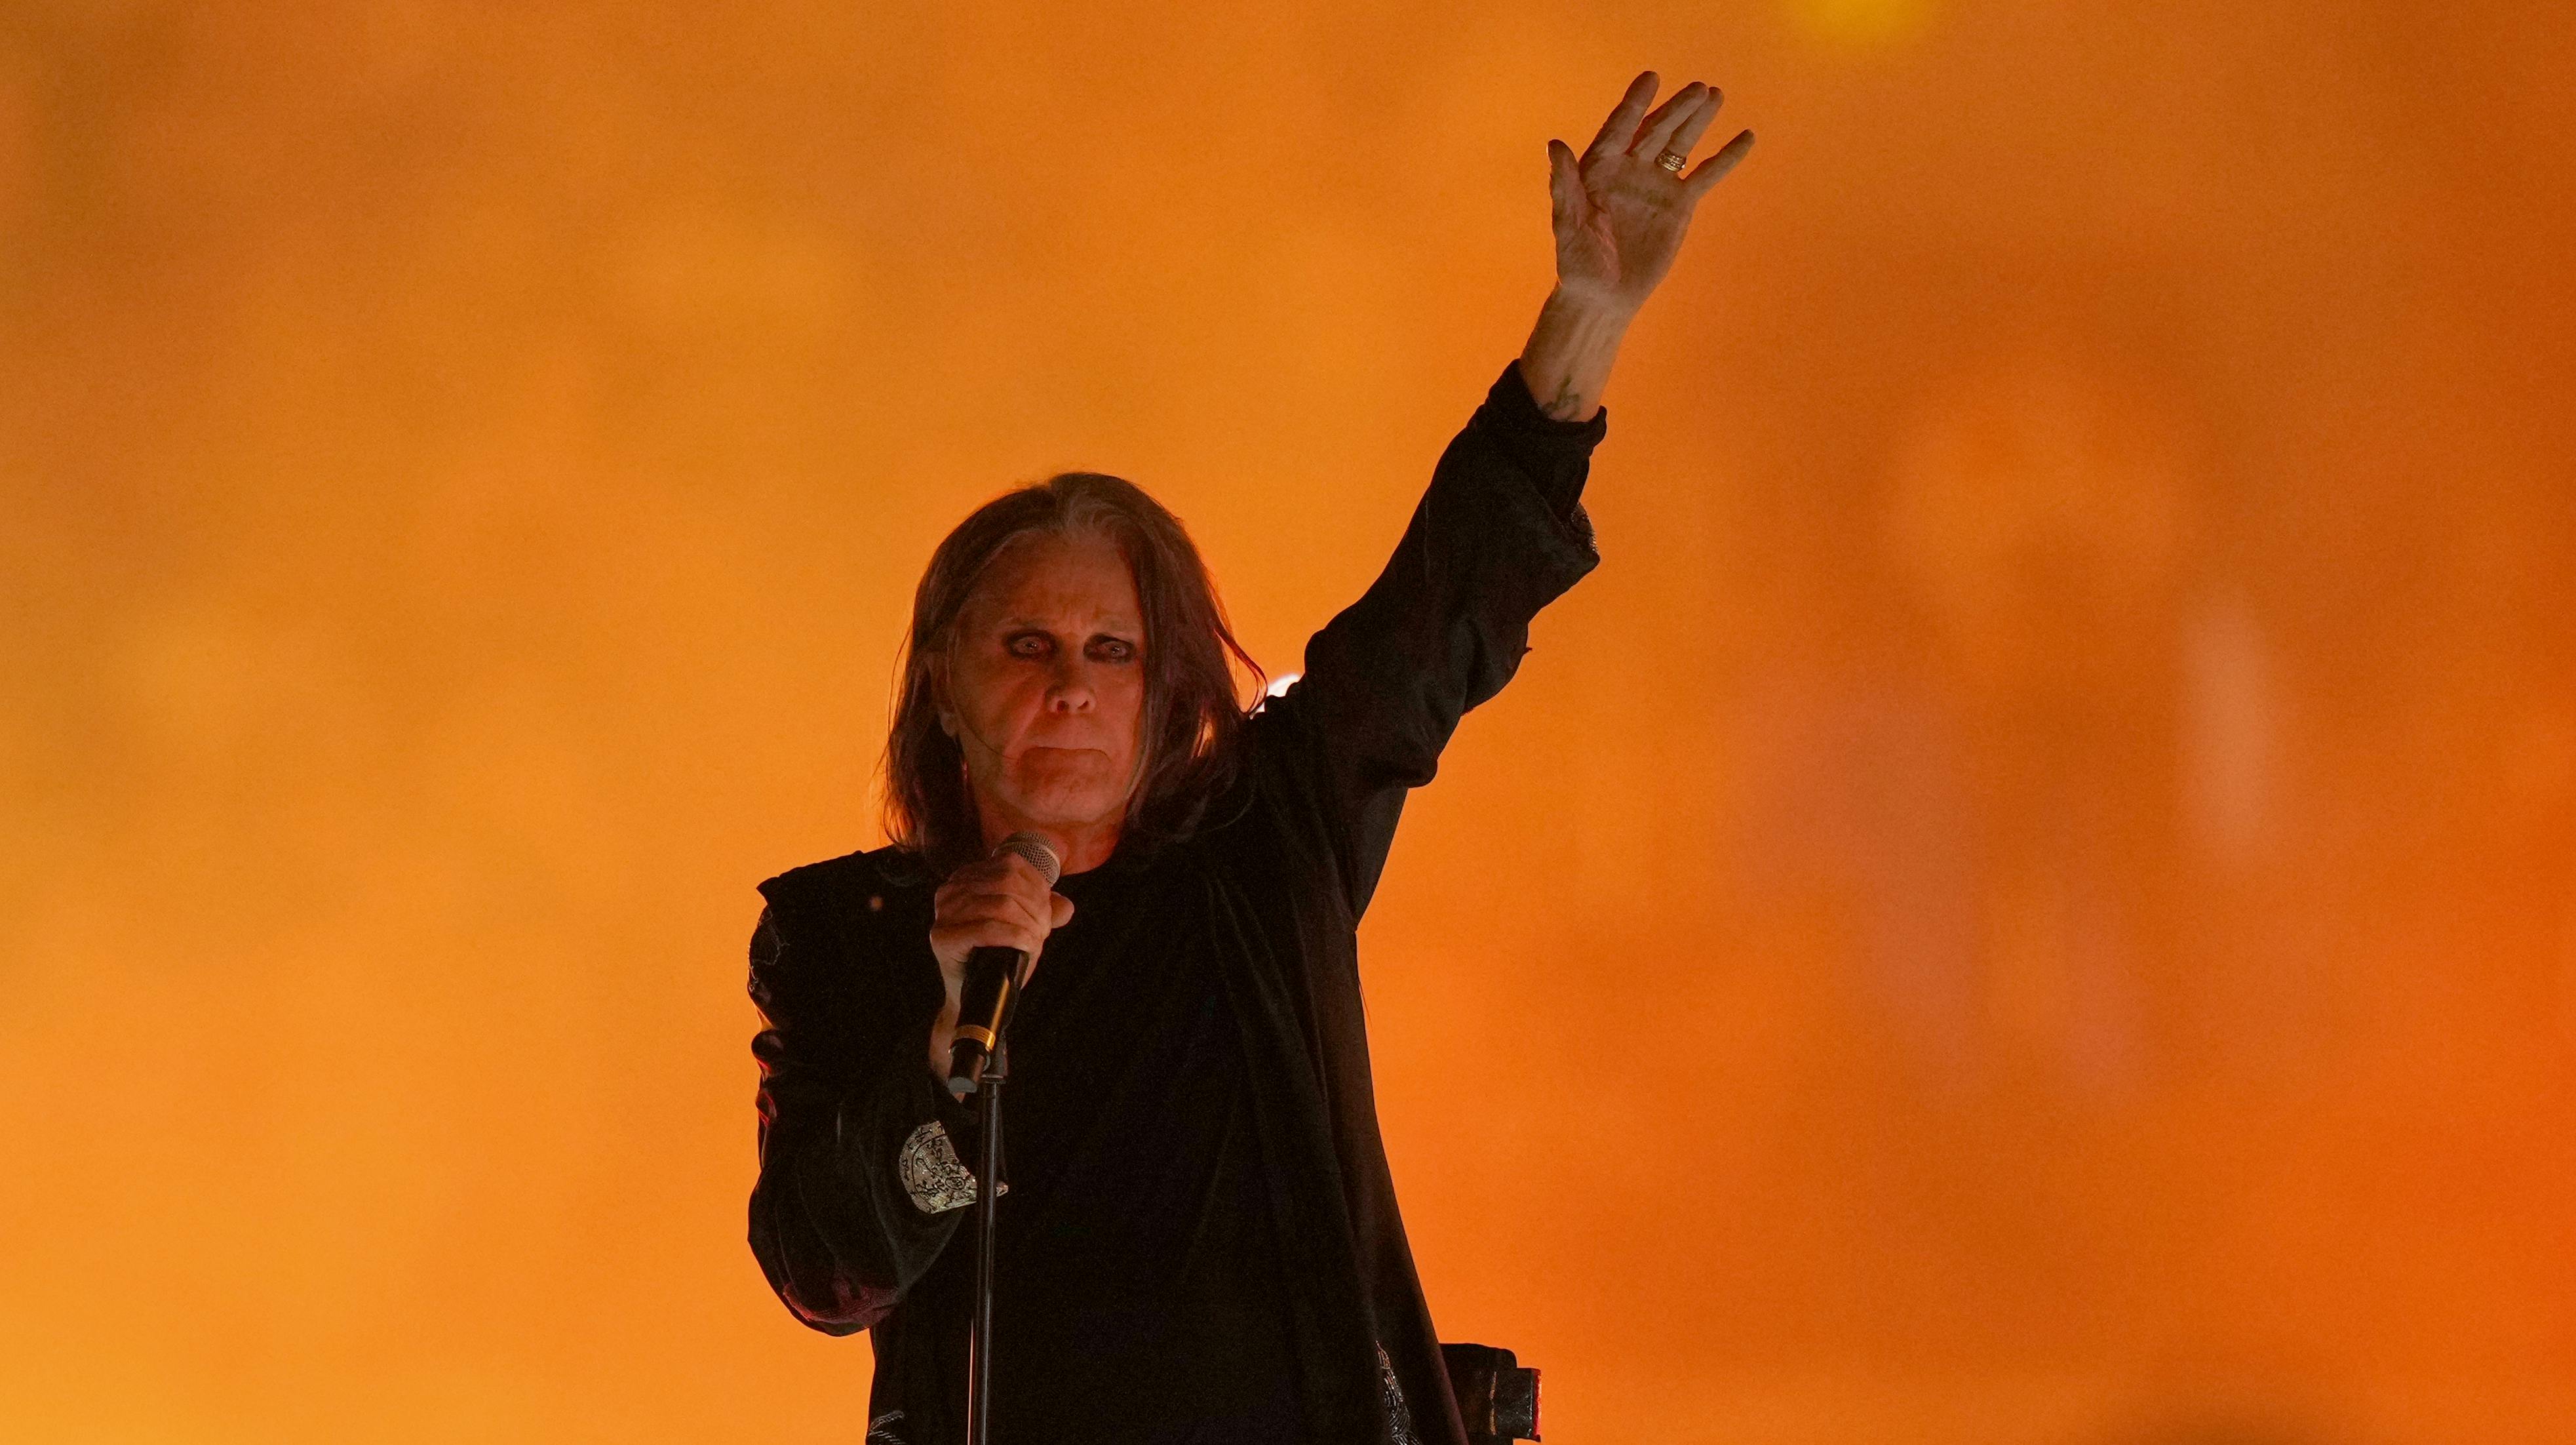 Ozzy Osbourne performs during the Commonwealth Games closing ceremony at the Alexander stadium in Birmingham, England, Monday, Aug. 8, 2022. (AP Photo/Alastair Grant)